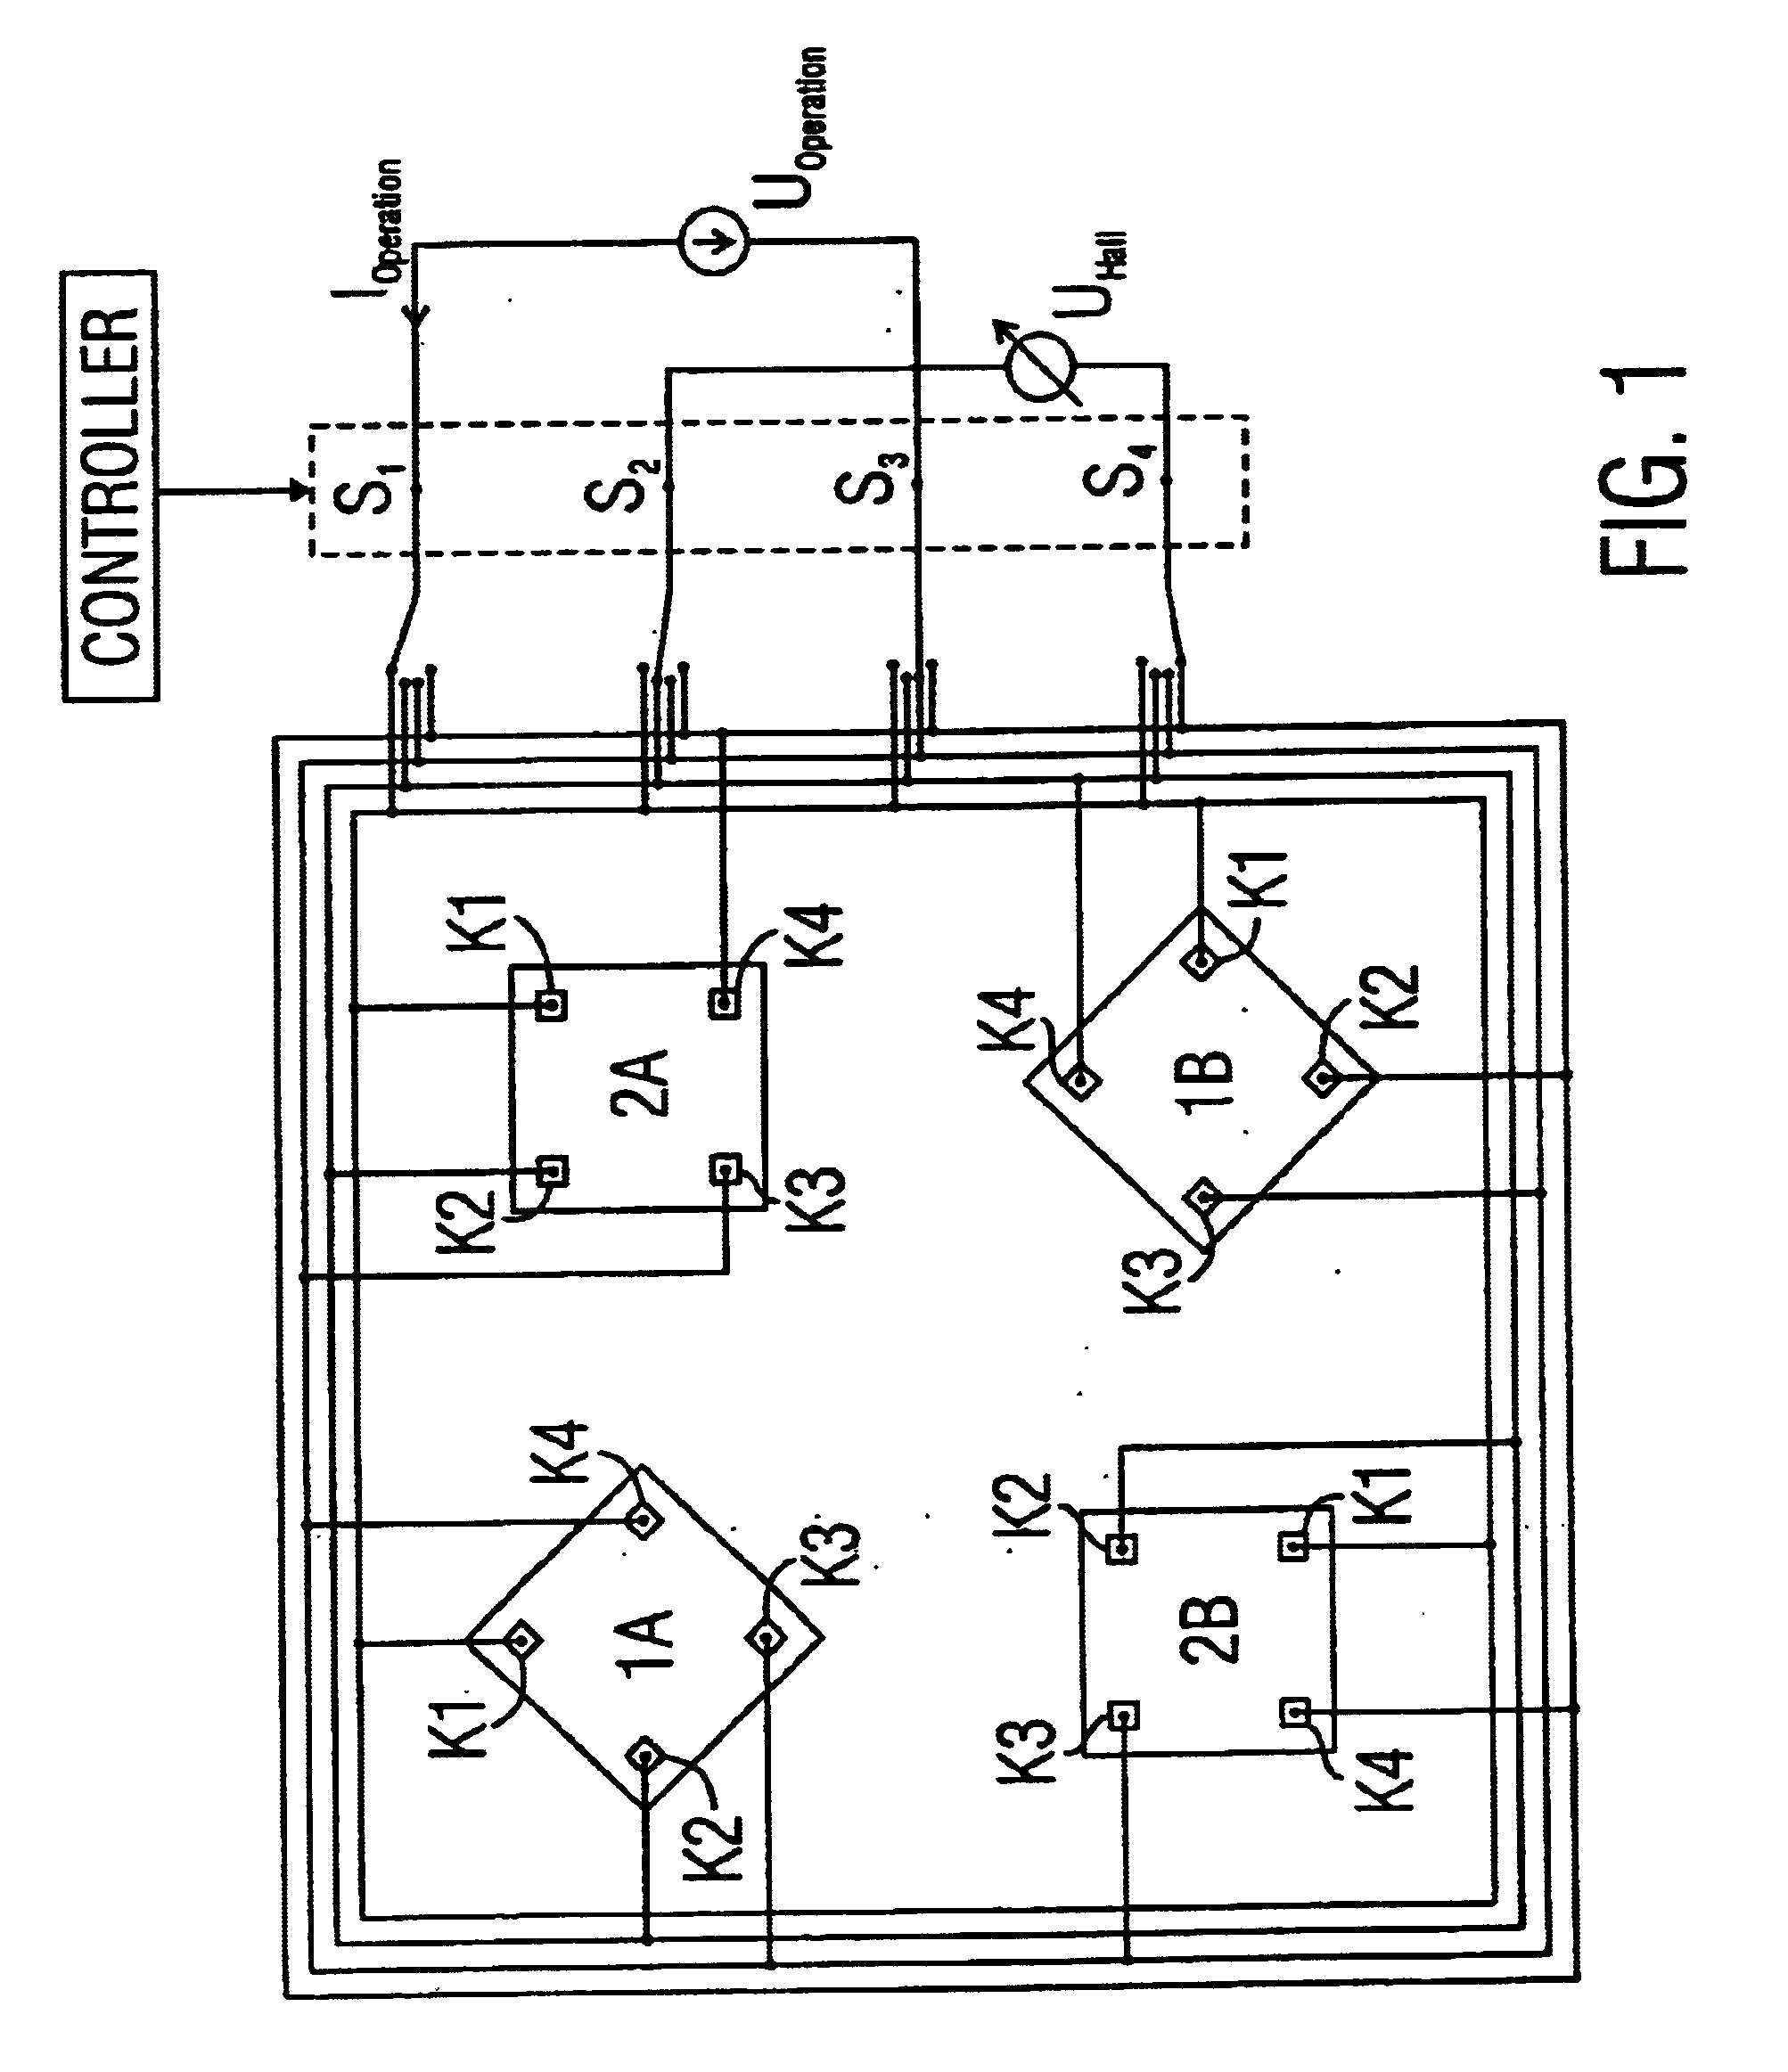 Hall sensor array for measuring a magnetic field with offset compensation